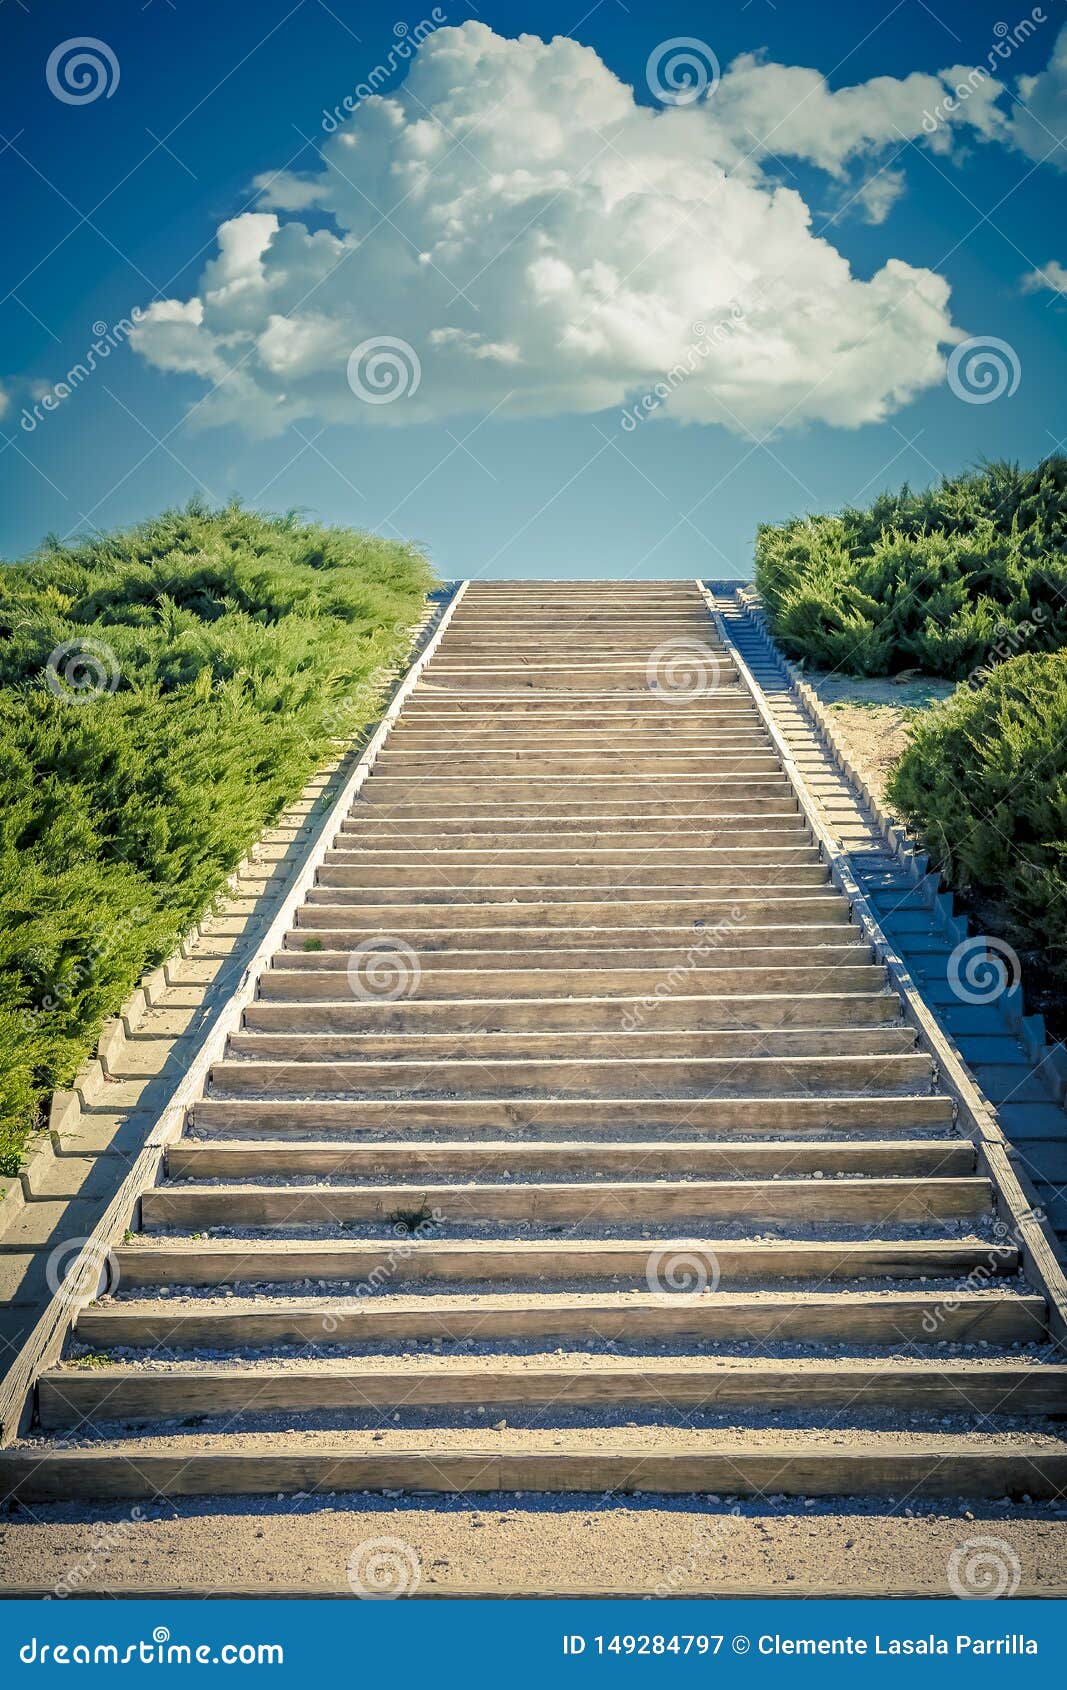 concept of stairway to success